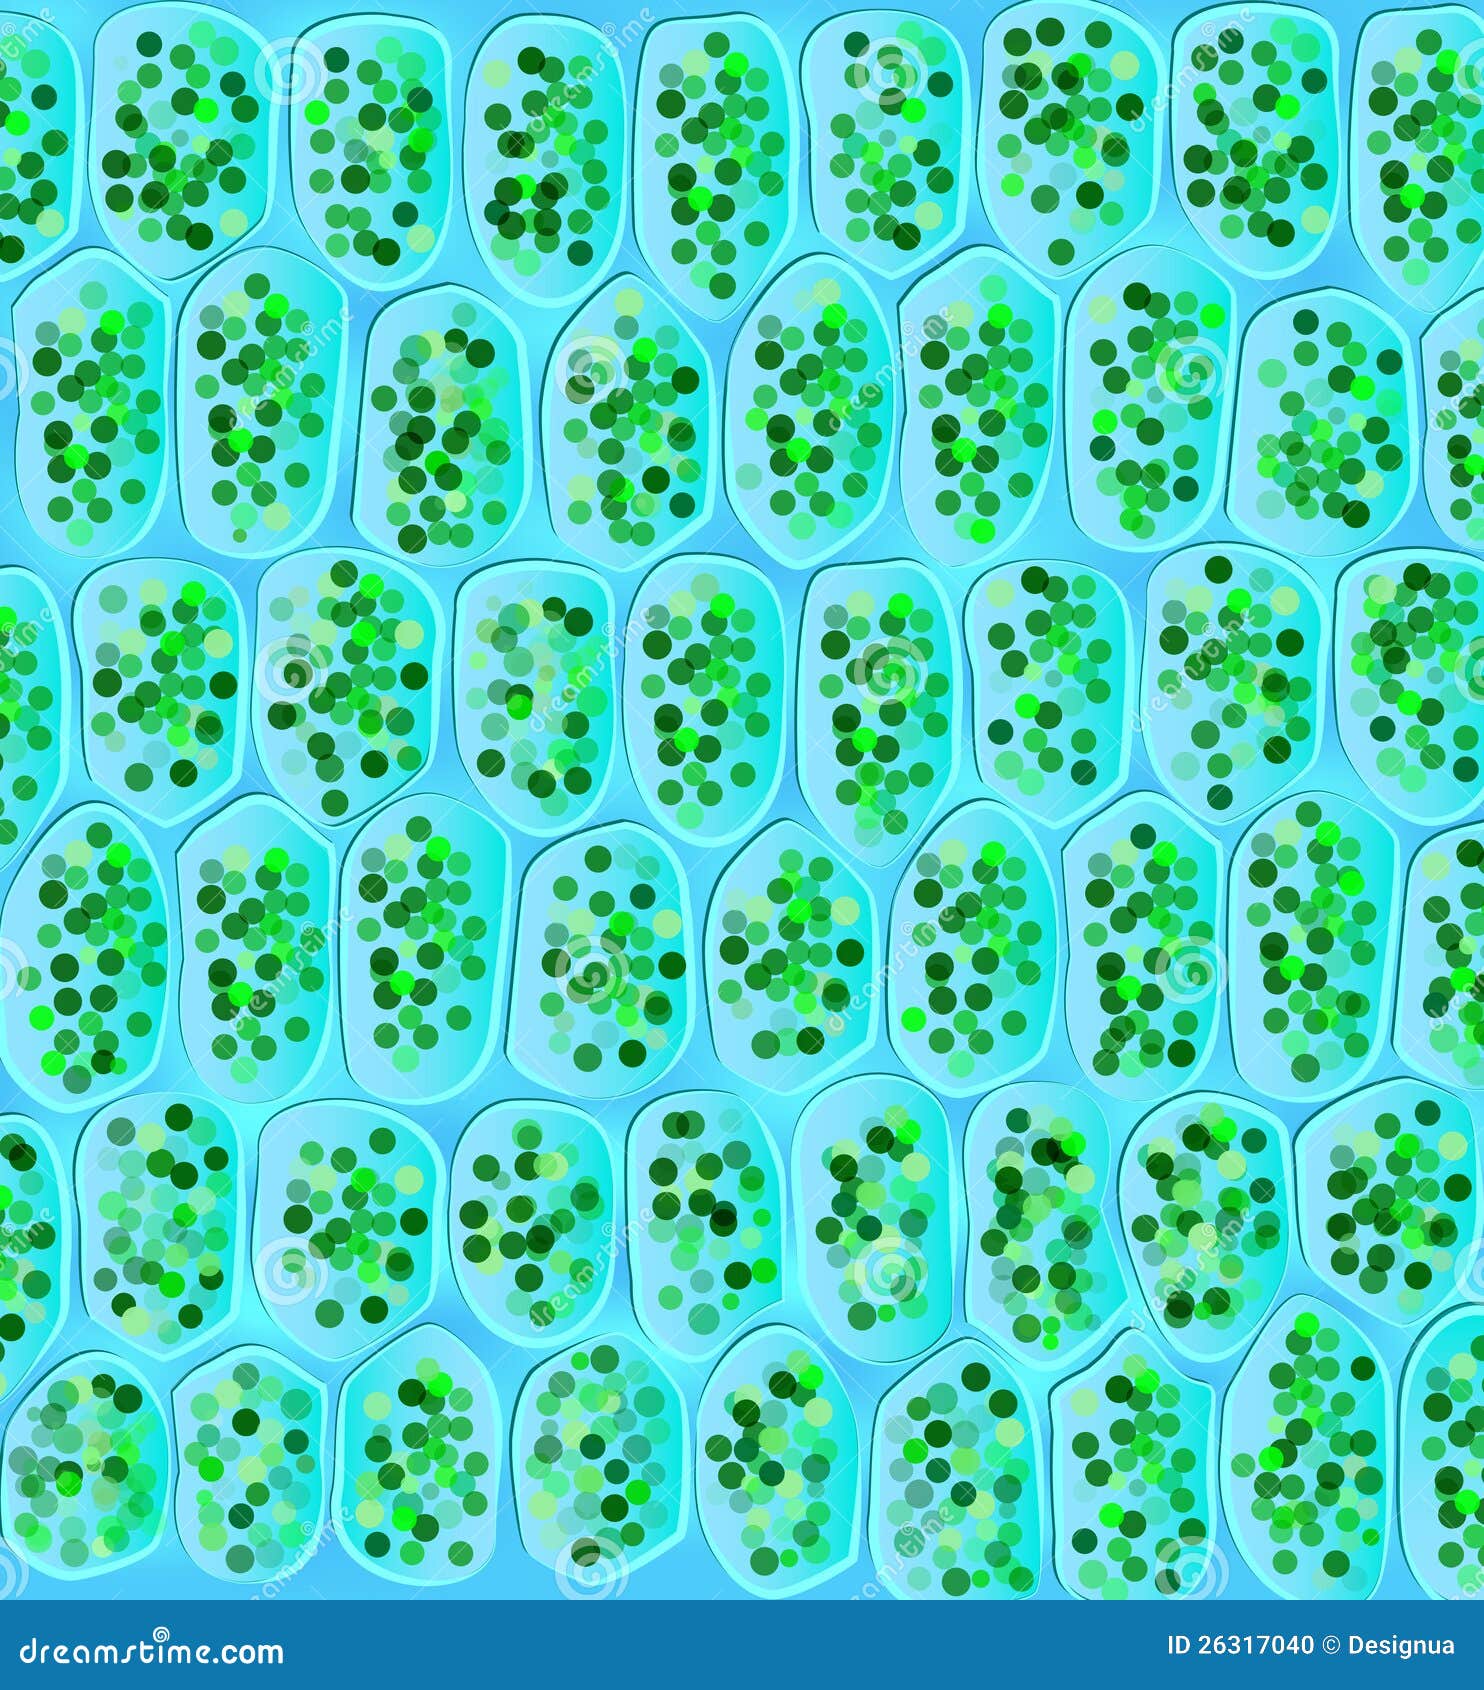 chloroplasts visible in the cells